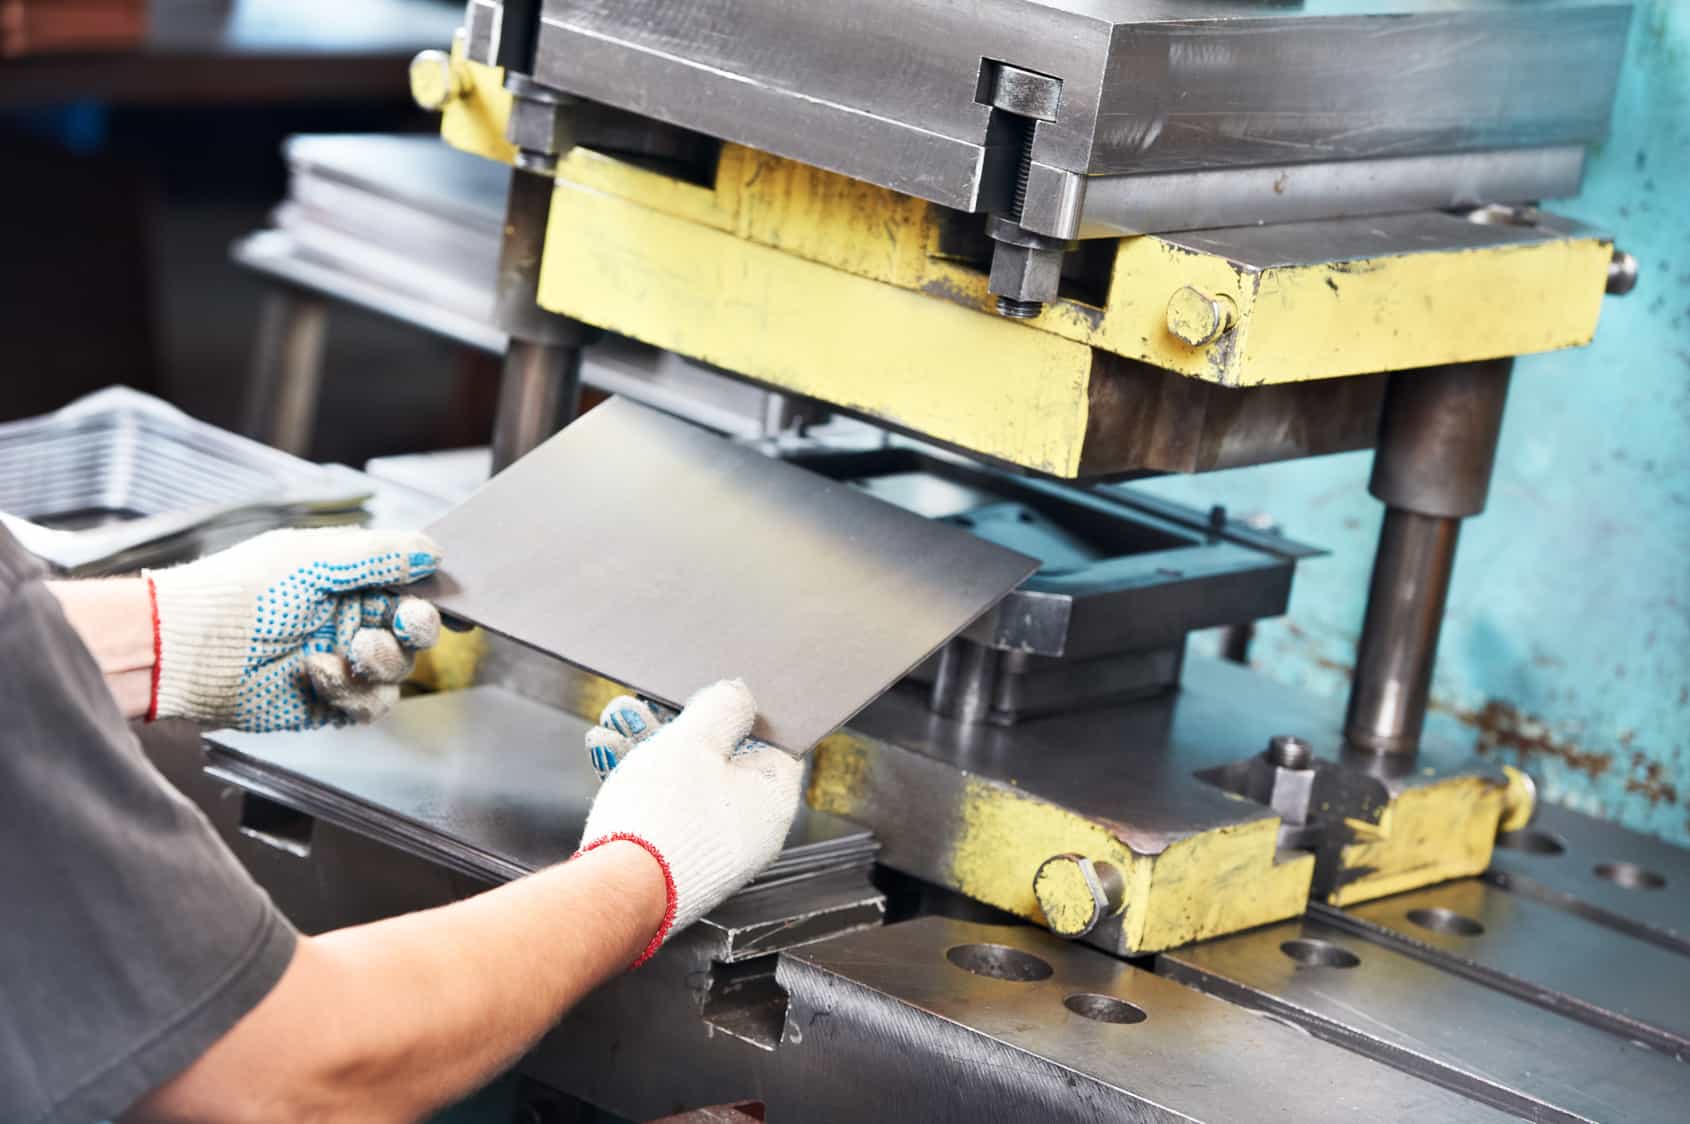 4 things For You To Look For In A Metal Stamping Service